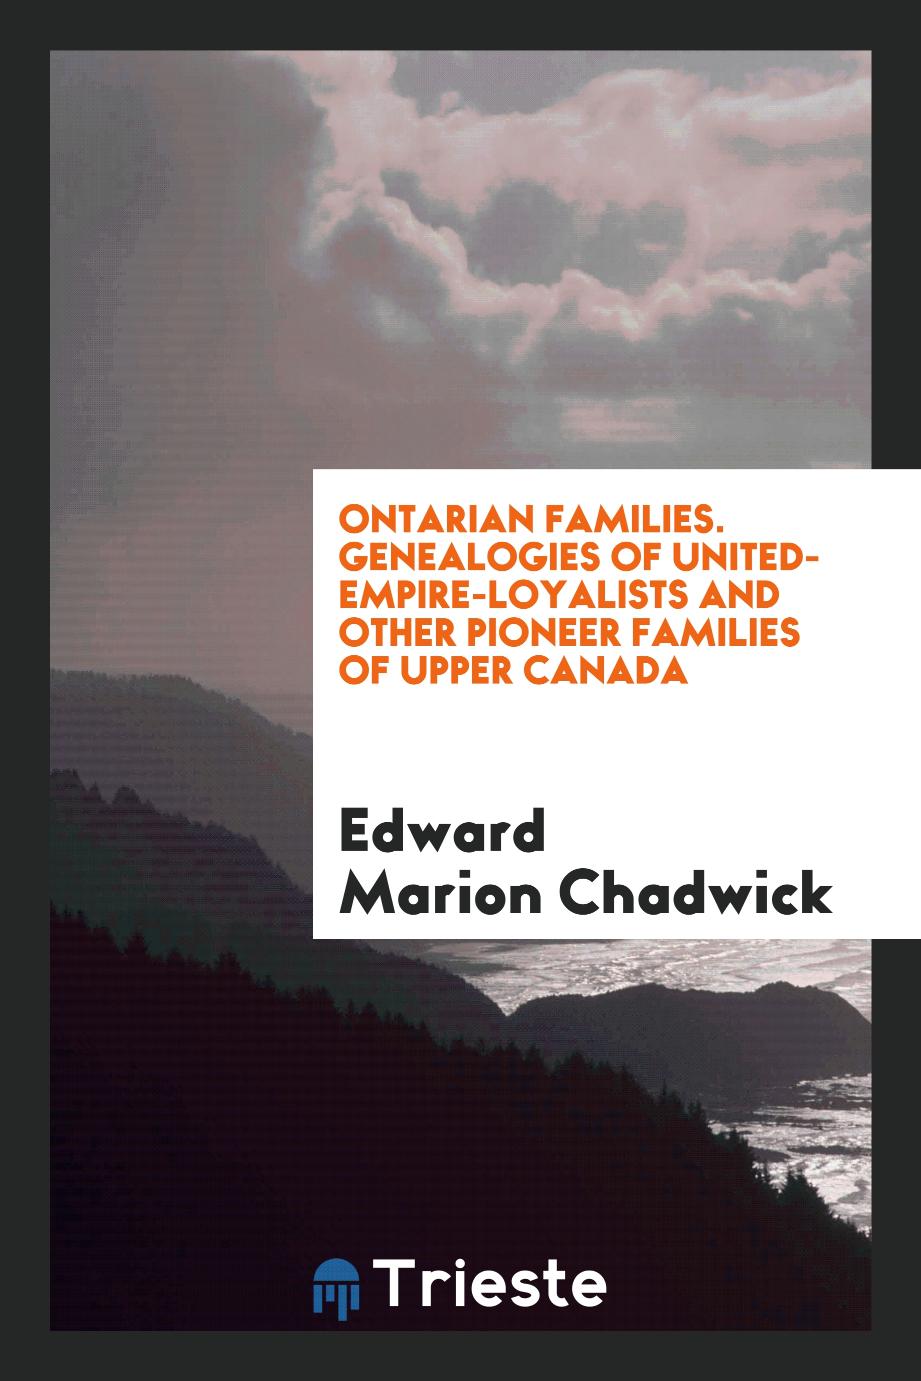 Ontarian Families. Genealogies of United-Empire-Loyalists and Other Pioneer Families of Upper Canada